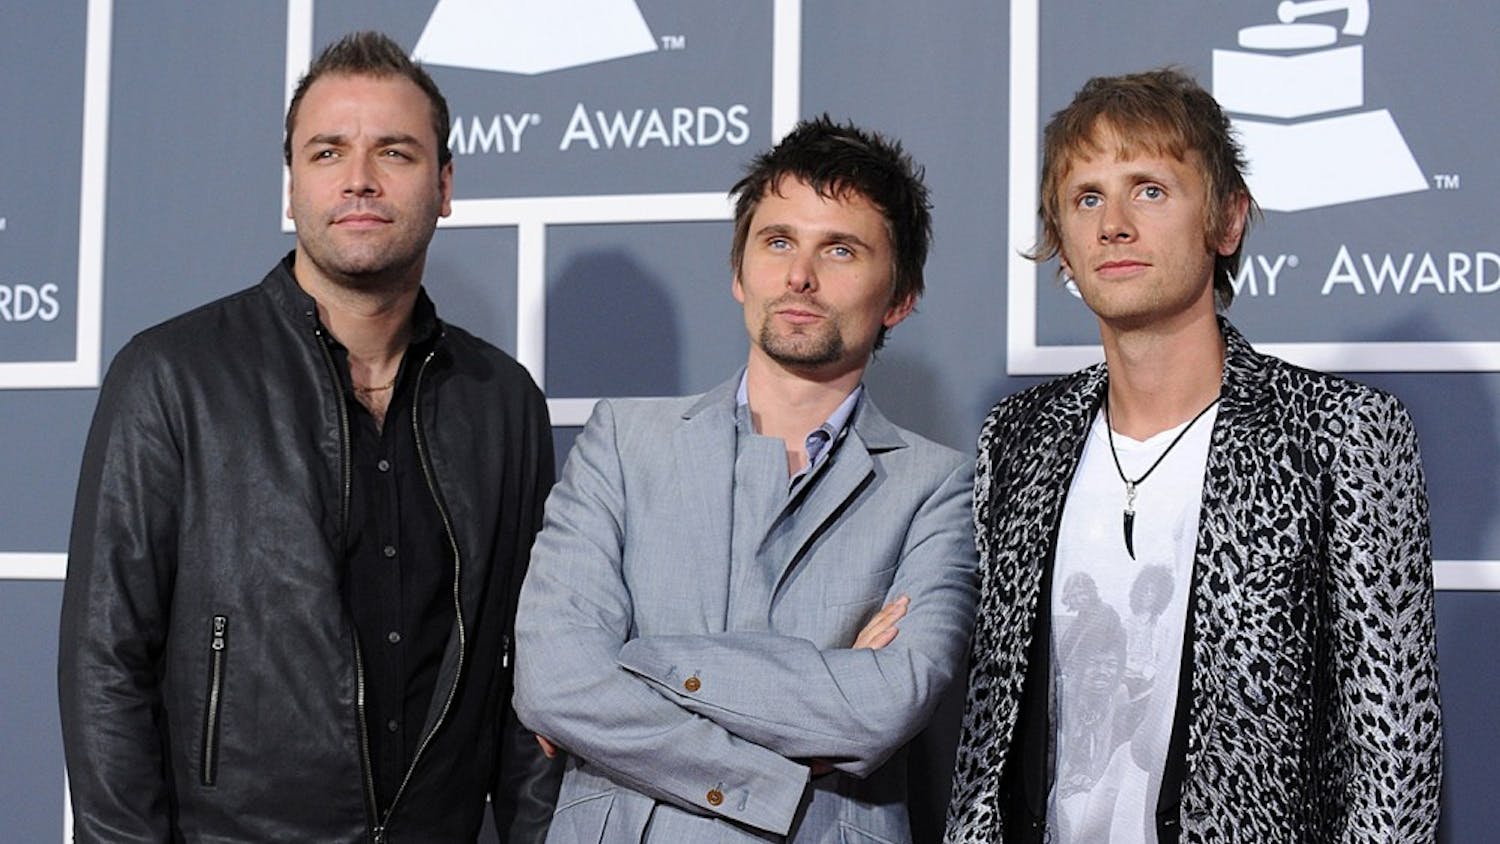 Dominic Howard, Matthew Bellamy and Christopher Wolstenholme of Muse arrive for the 53rd Annual Grammy Awards show at the Staples Center in Los Angeles, California on February 13, 2011. (Lionel Hahn/Abaca Press/MCT)